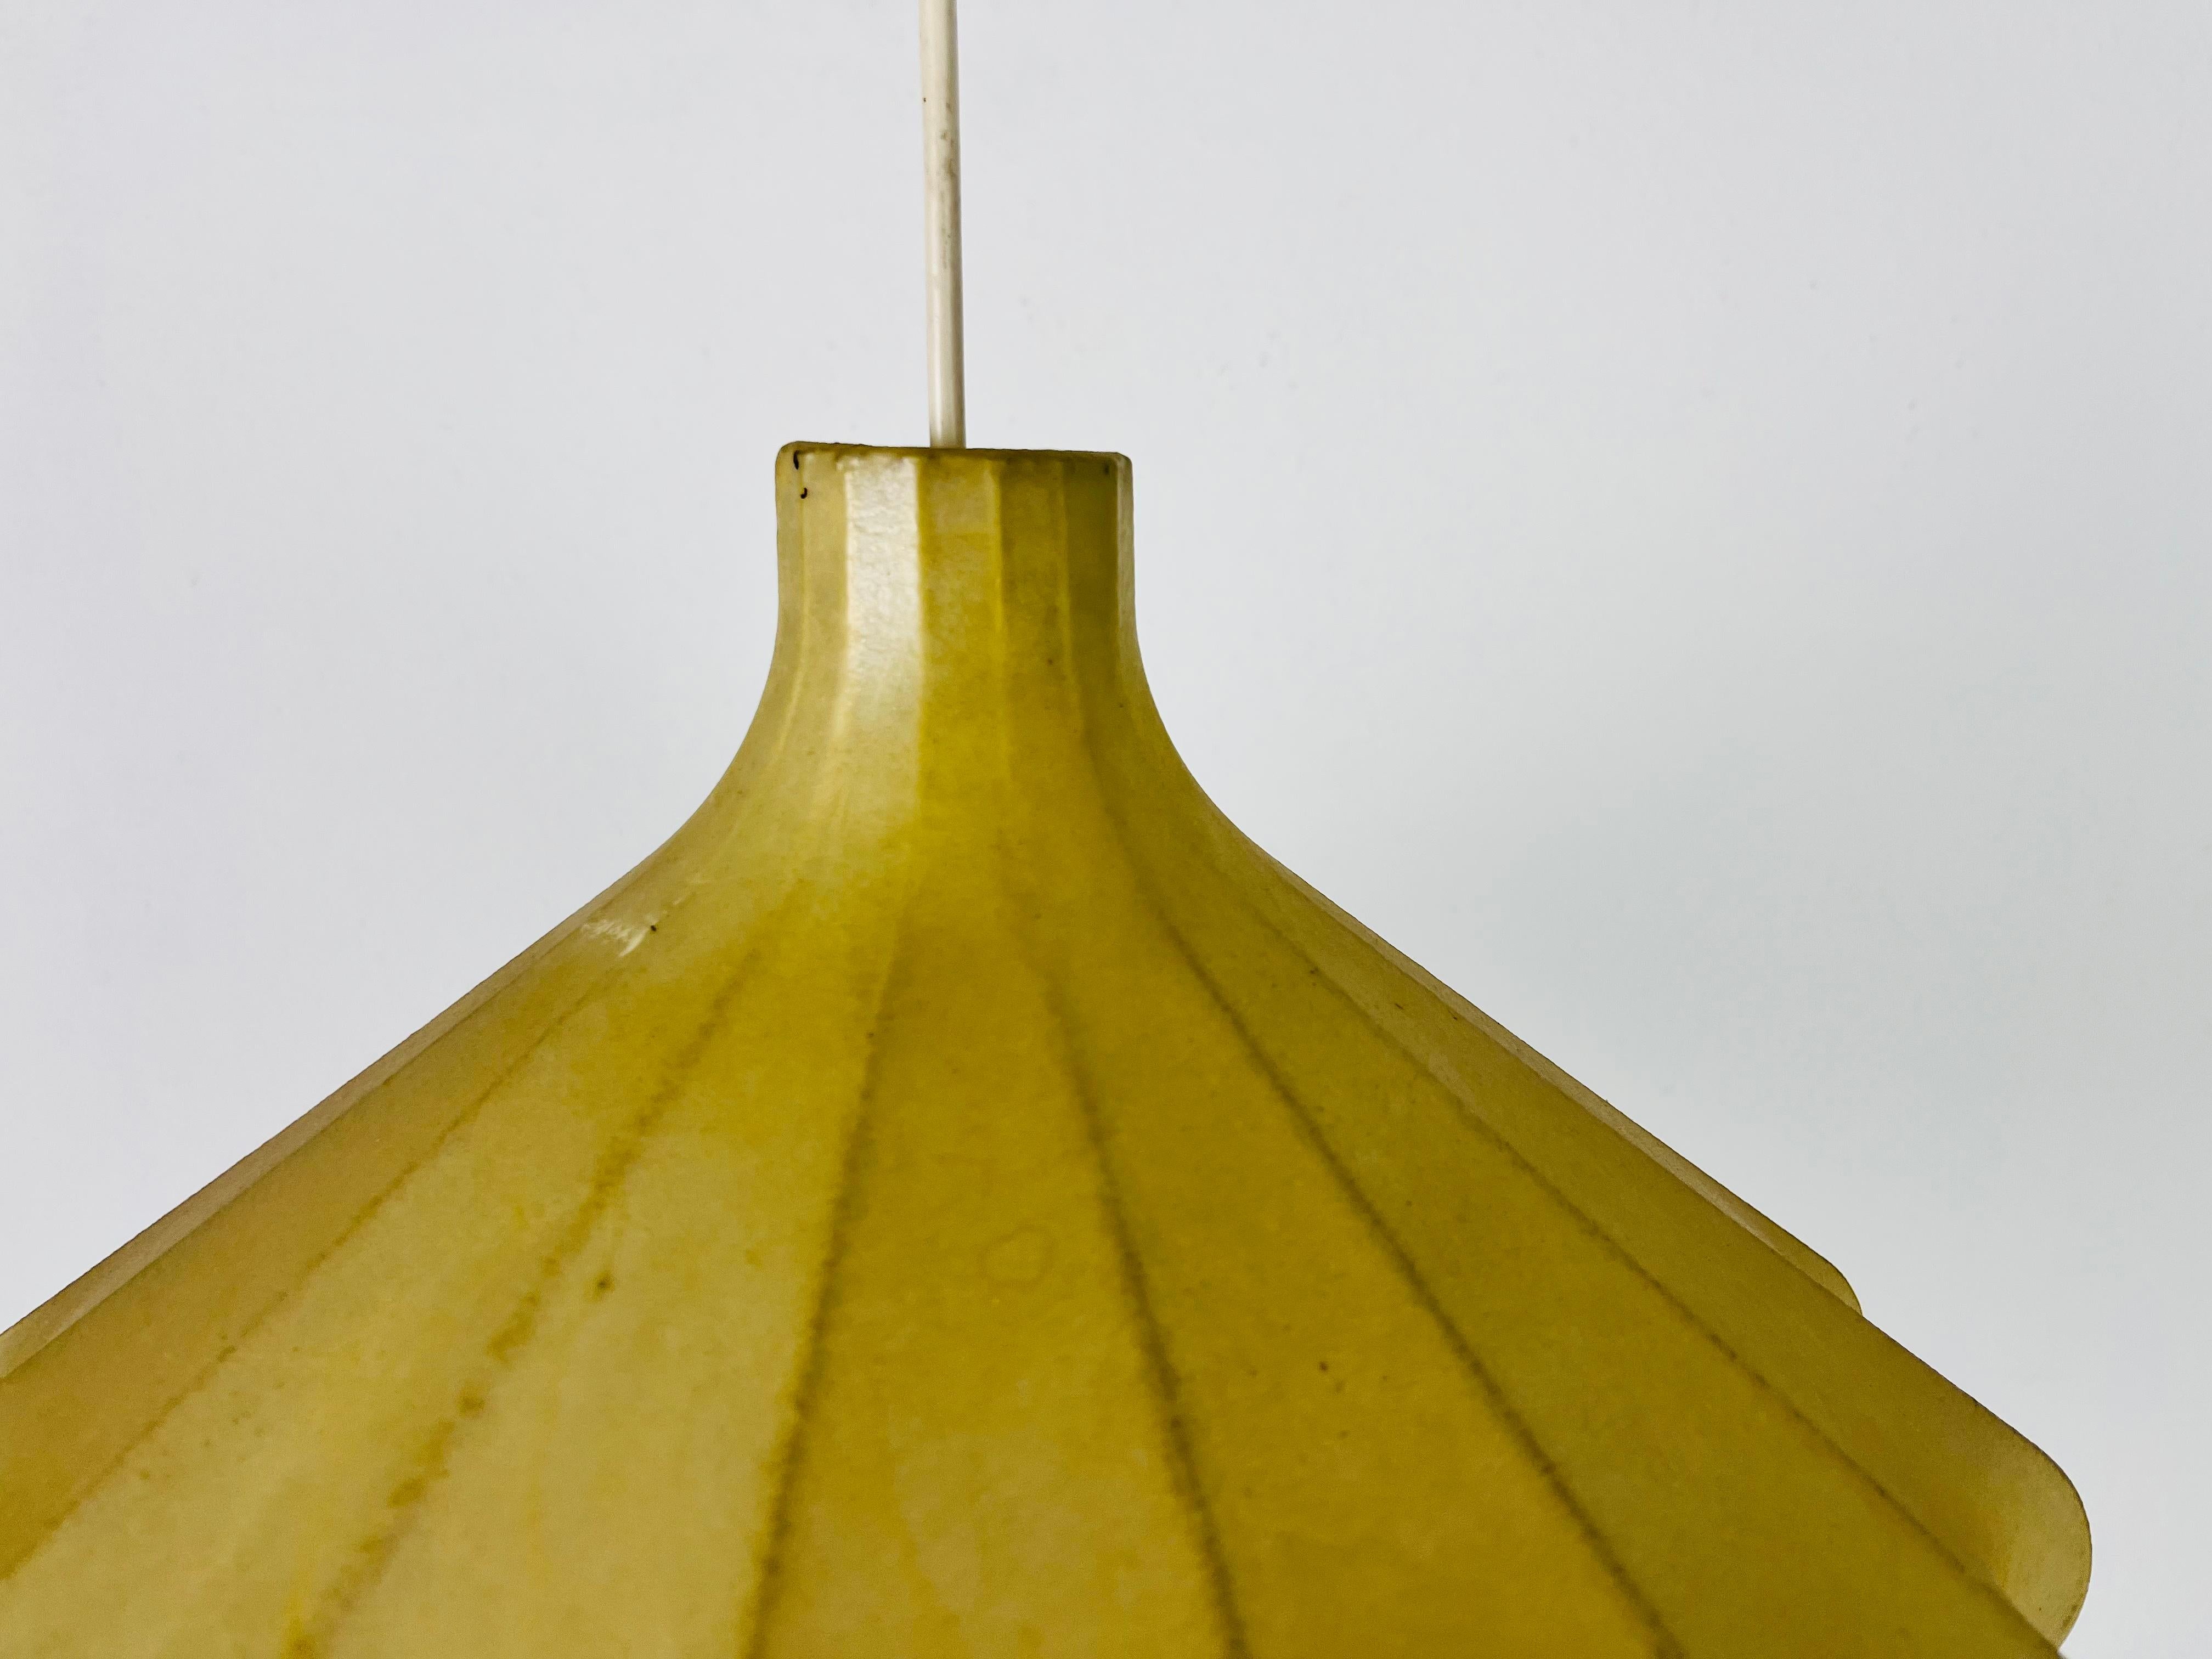 Mid-Century Modern Cocoon Pendant Light, 1960s, Italy For Sale 2